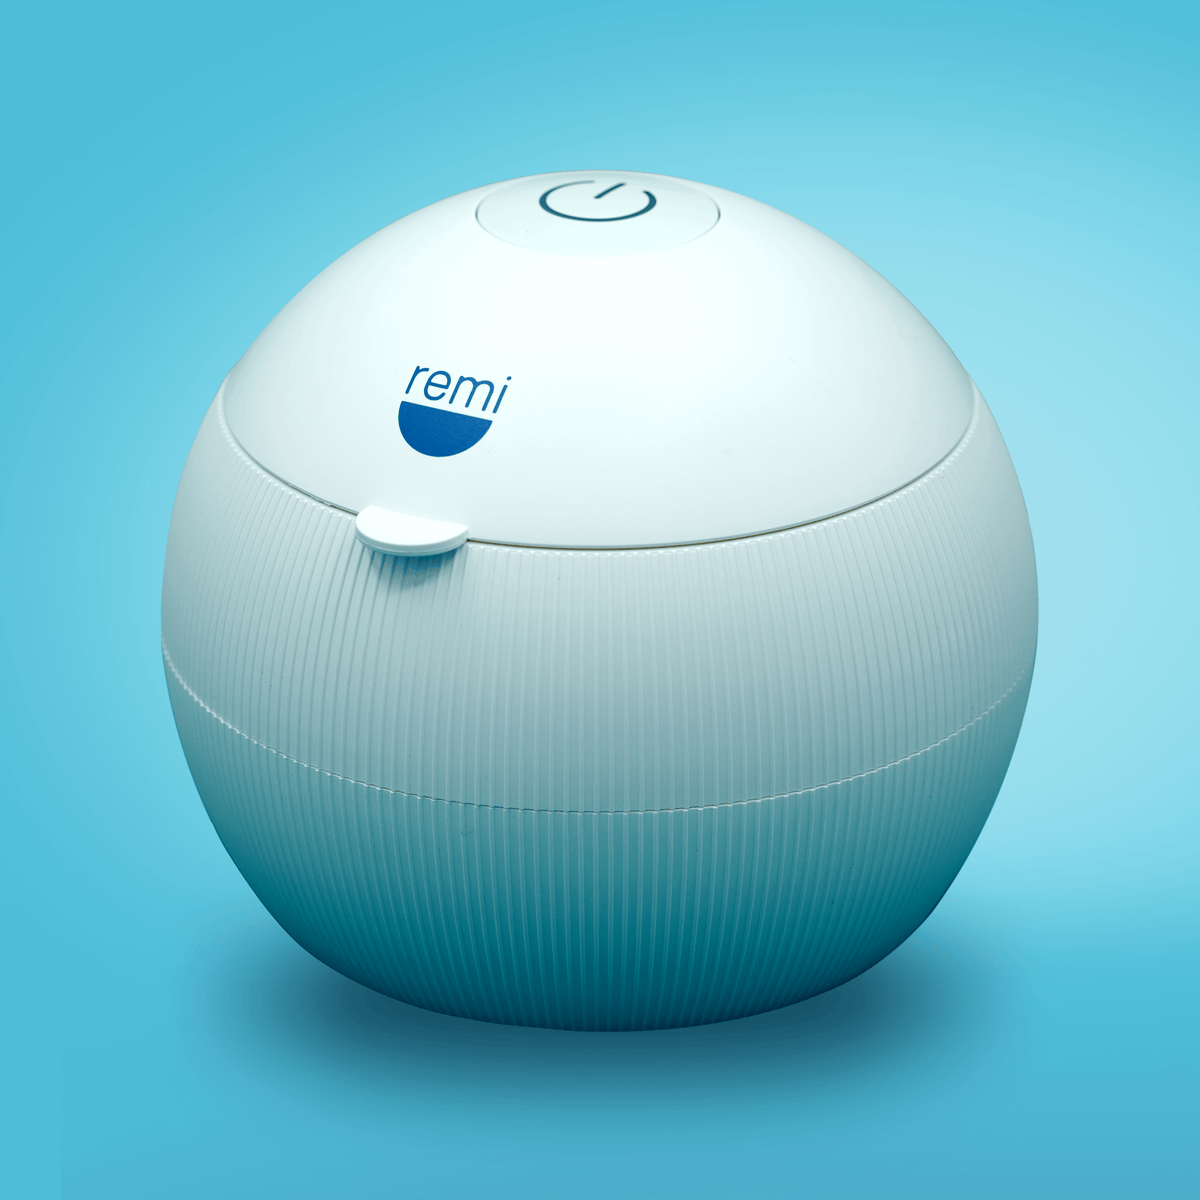 Egg-shaped Ultrasonic Cleaning &amp; Sanitizing Device with a power button on top and &quot;remi&quot; branding.